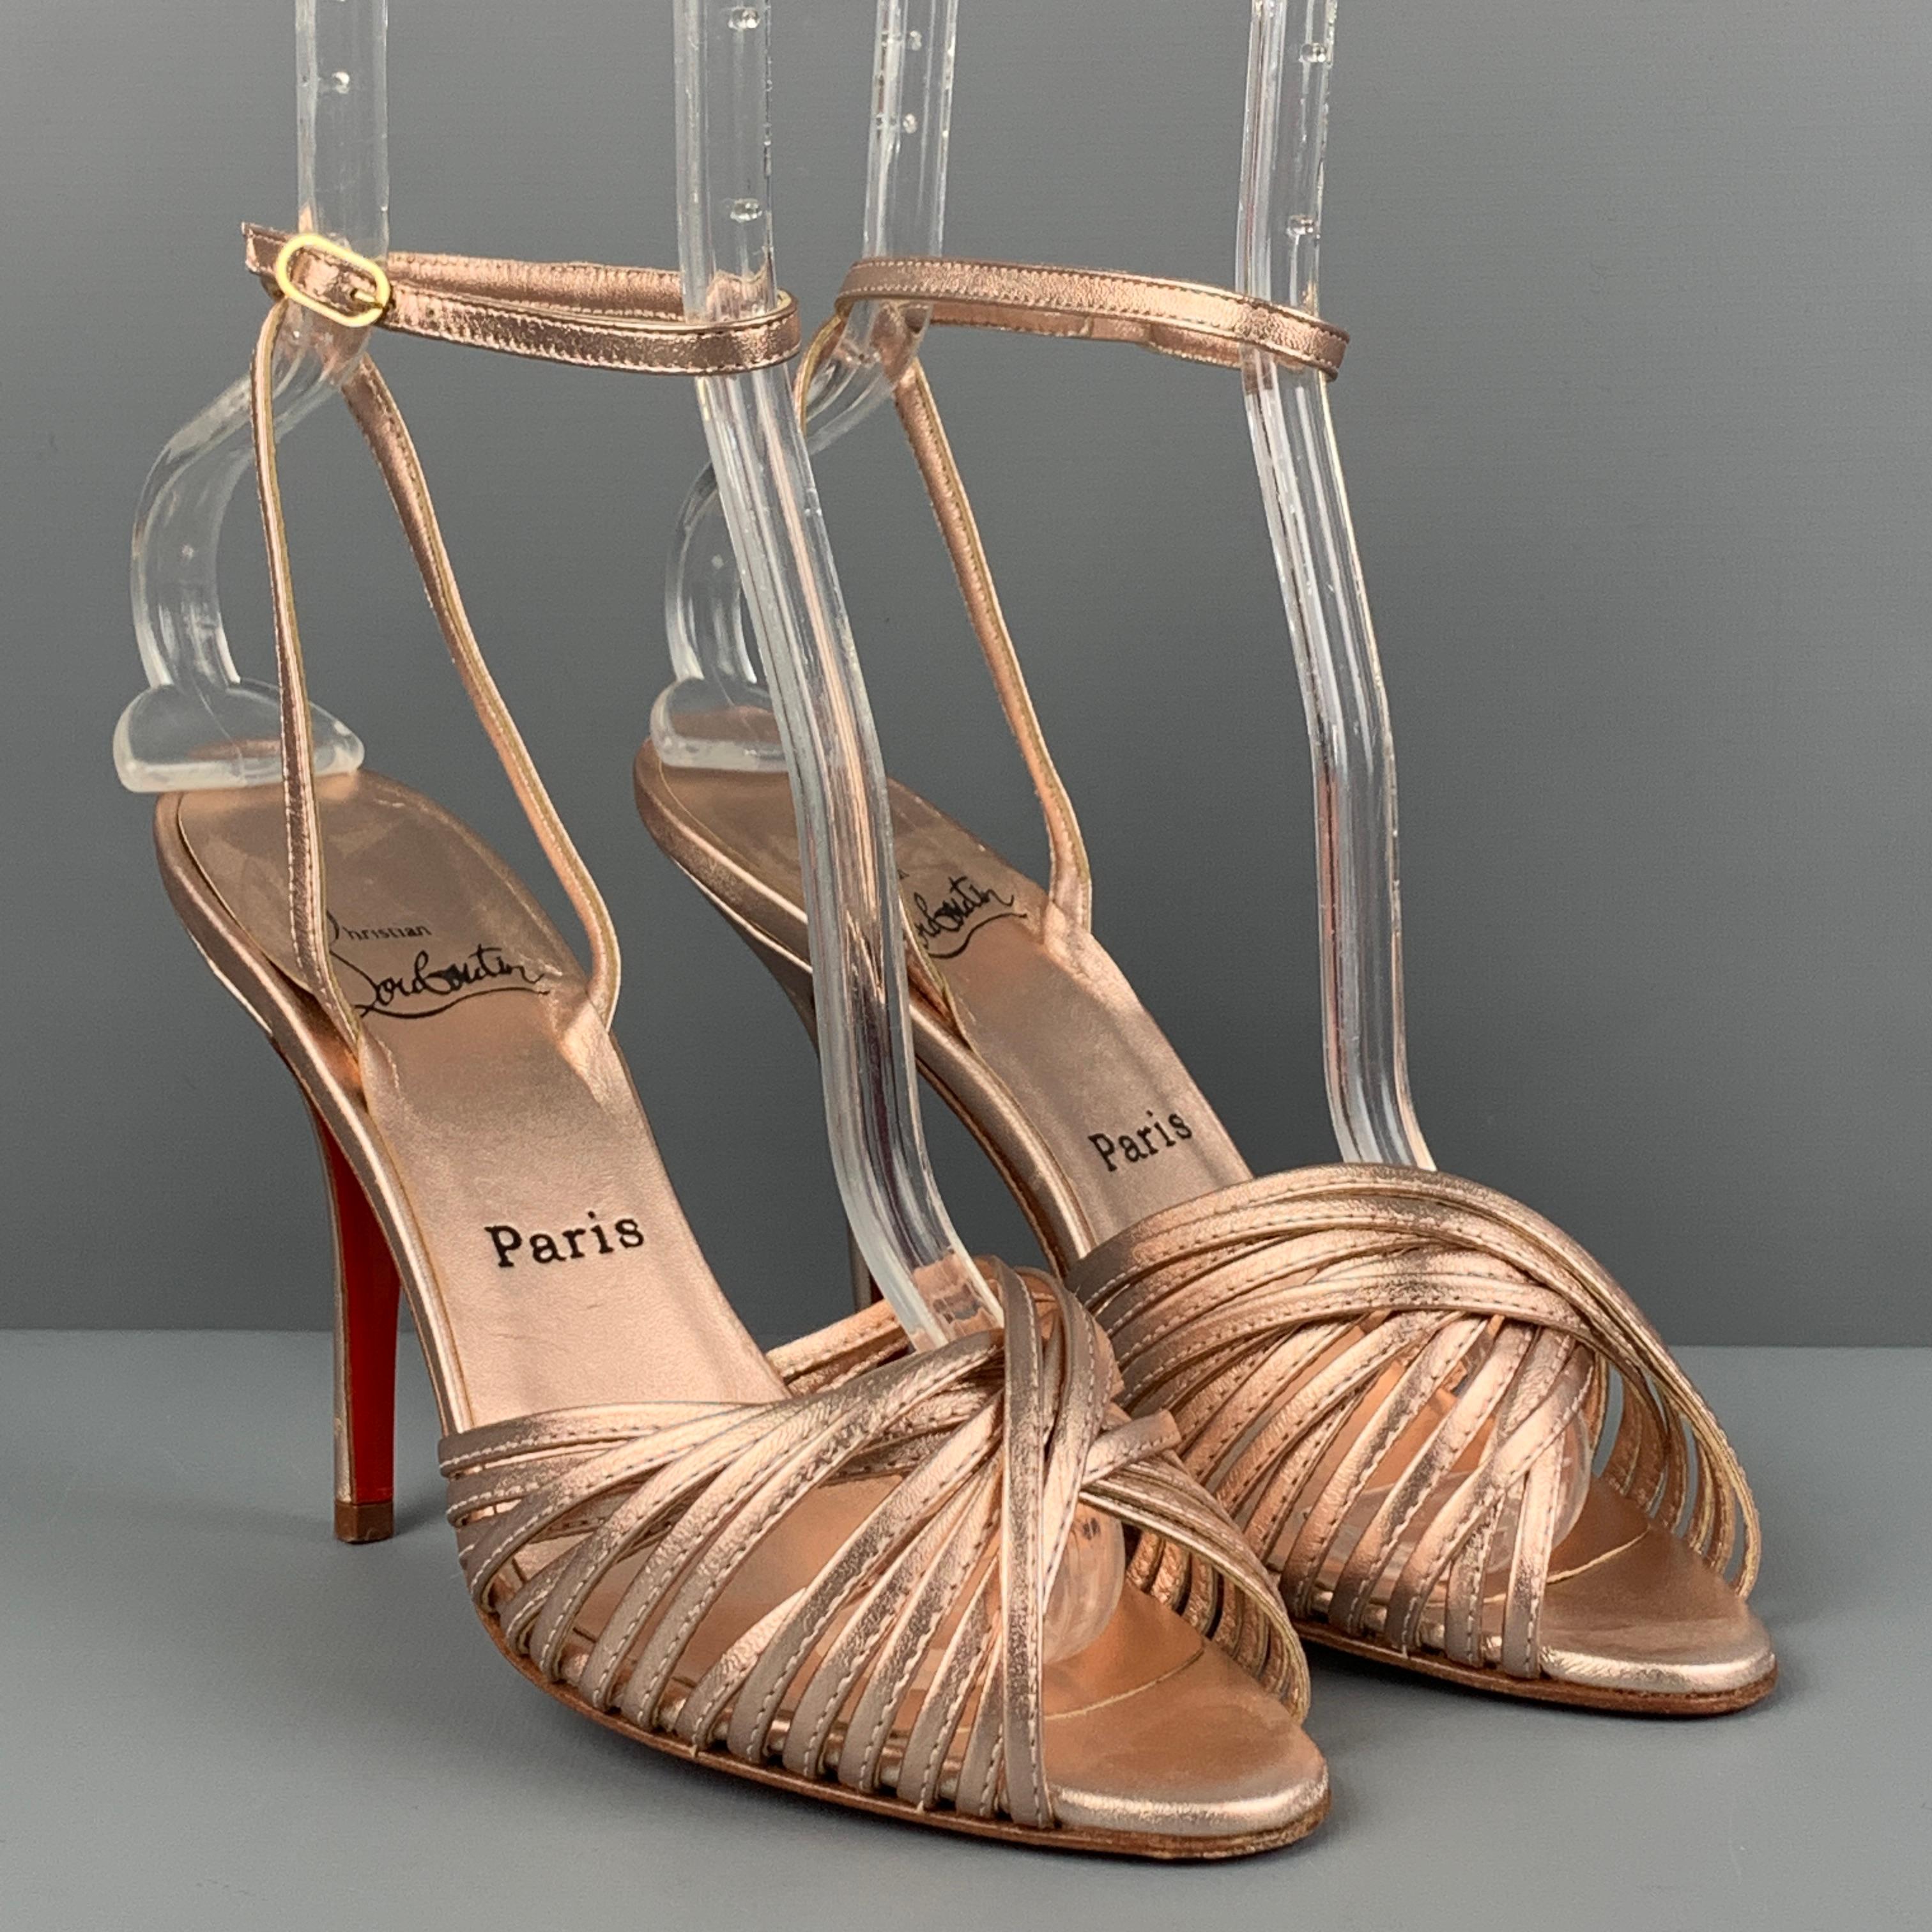 CHRISTIAN LOUBOUTIN sandals comes in a rose metallic leather featuring a open toe, ankle strap, and a stiletto heel. Made in Italy. 

Very Good Pre-Owned Condition.
Marked: 37

Measurements:

Heel: 4 in. 